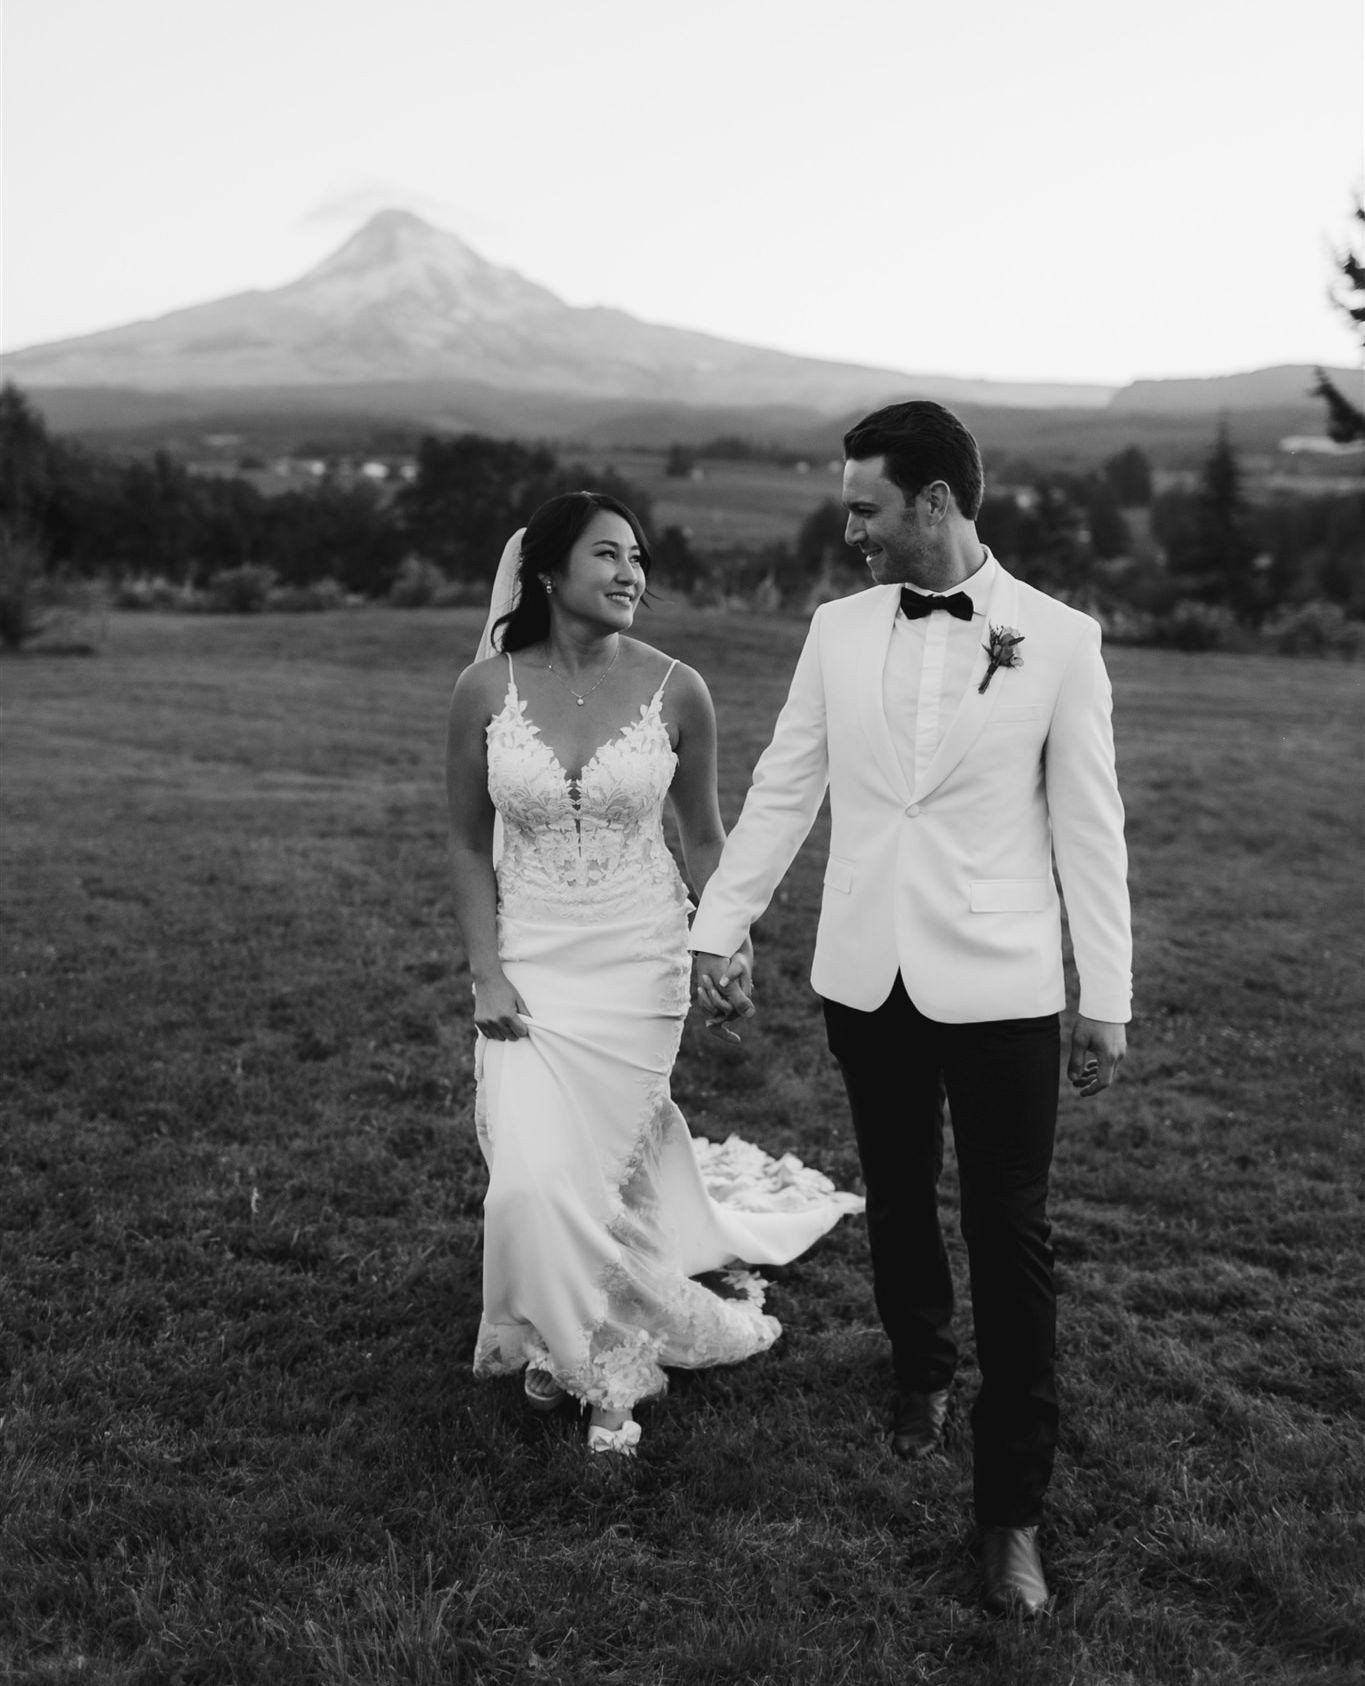 I'm headed to gorgeous Hood River on Saturday for my first PNW wedding of the season! It feels so good to be back and getting cuties like Karina &amp; her husb down the aisle. ⁠
⁠
HAIR HEROES:⁠
@livingproofinc Volume &amp; Texture Spray⁠
@colorwowhai